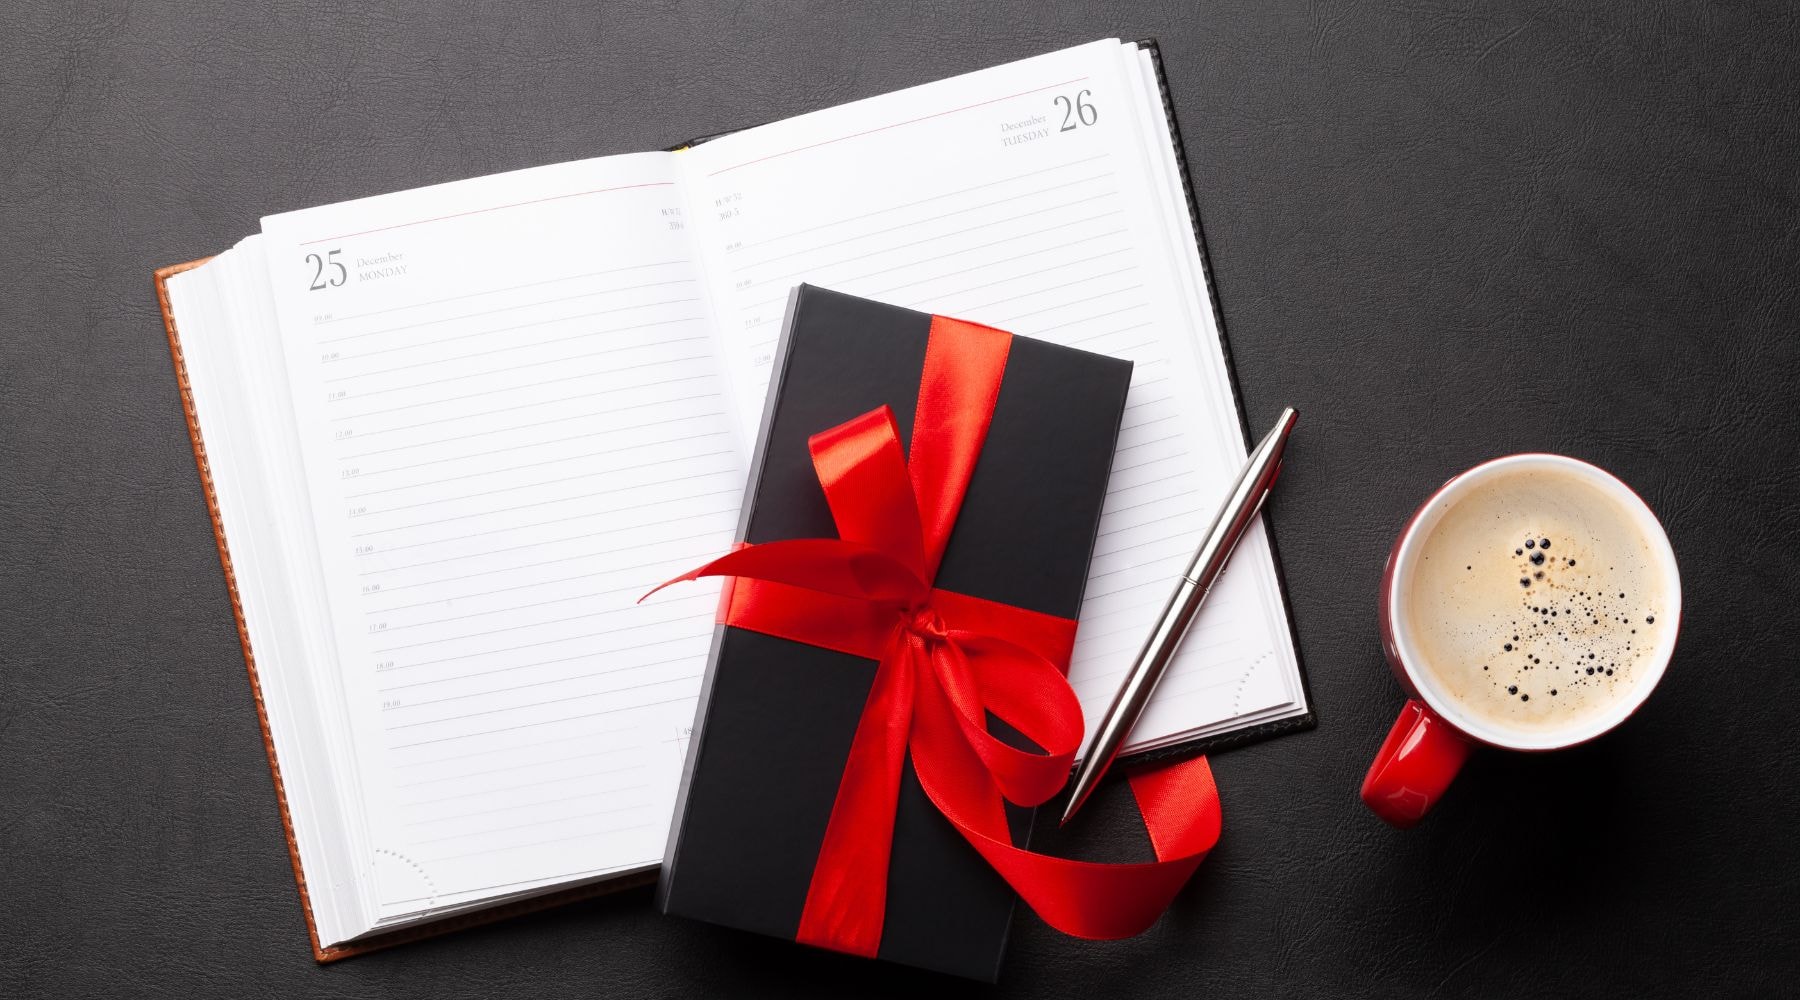 Black gift box with red ribbon on an open planner with a cup of coffee, indicating a scheduled gift-giving